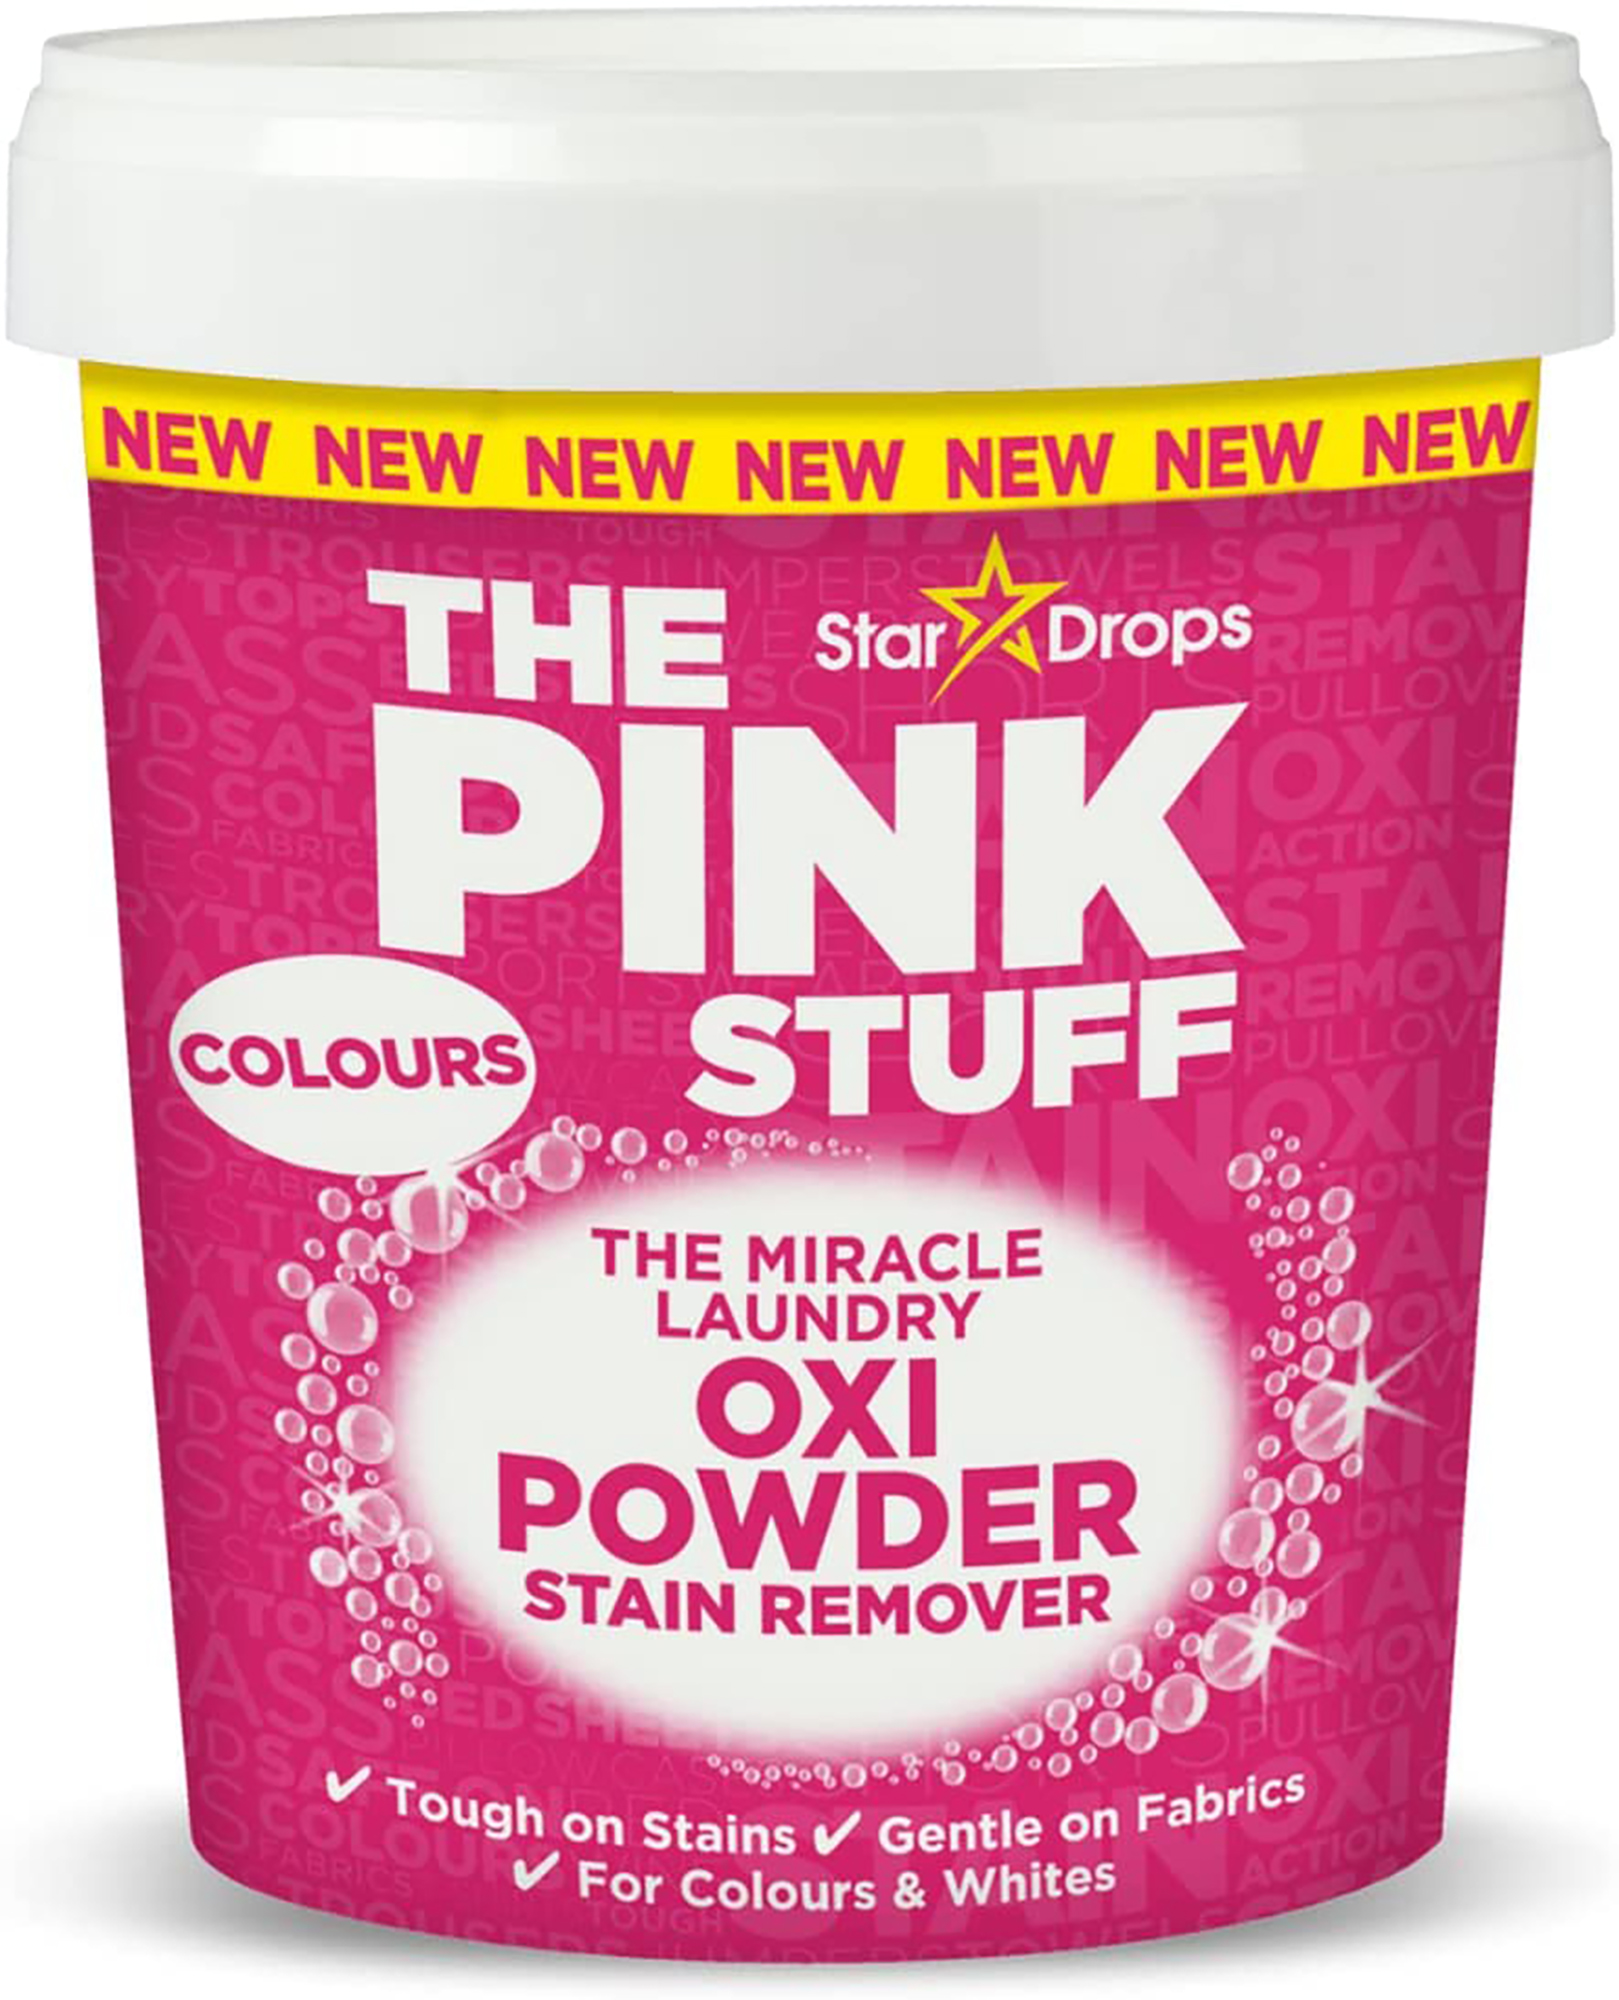 https://lyko.com/globalassets/product-images/the-pink-stuff-the-miracle-laundry-oxi-powder-stain-remover-colours-1200g-3278-109-1200_1.jpg?ref=7583720876